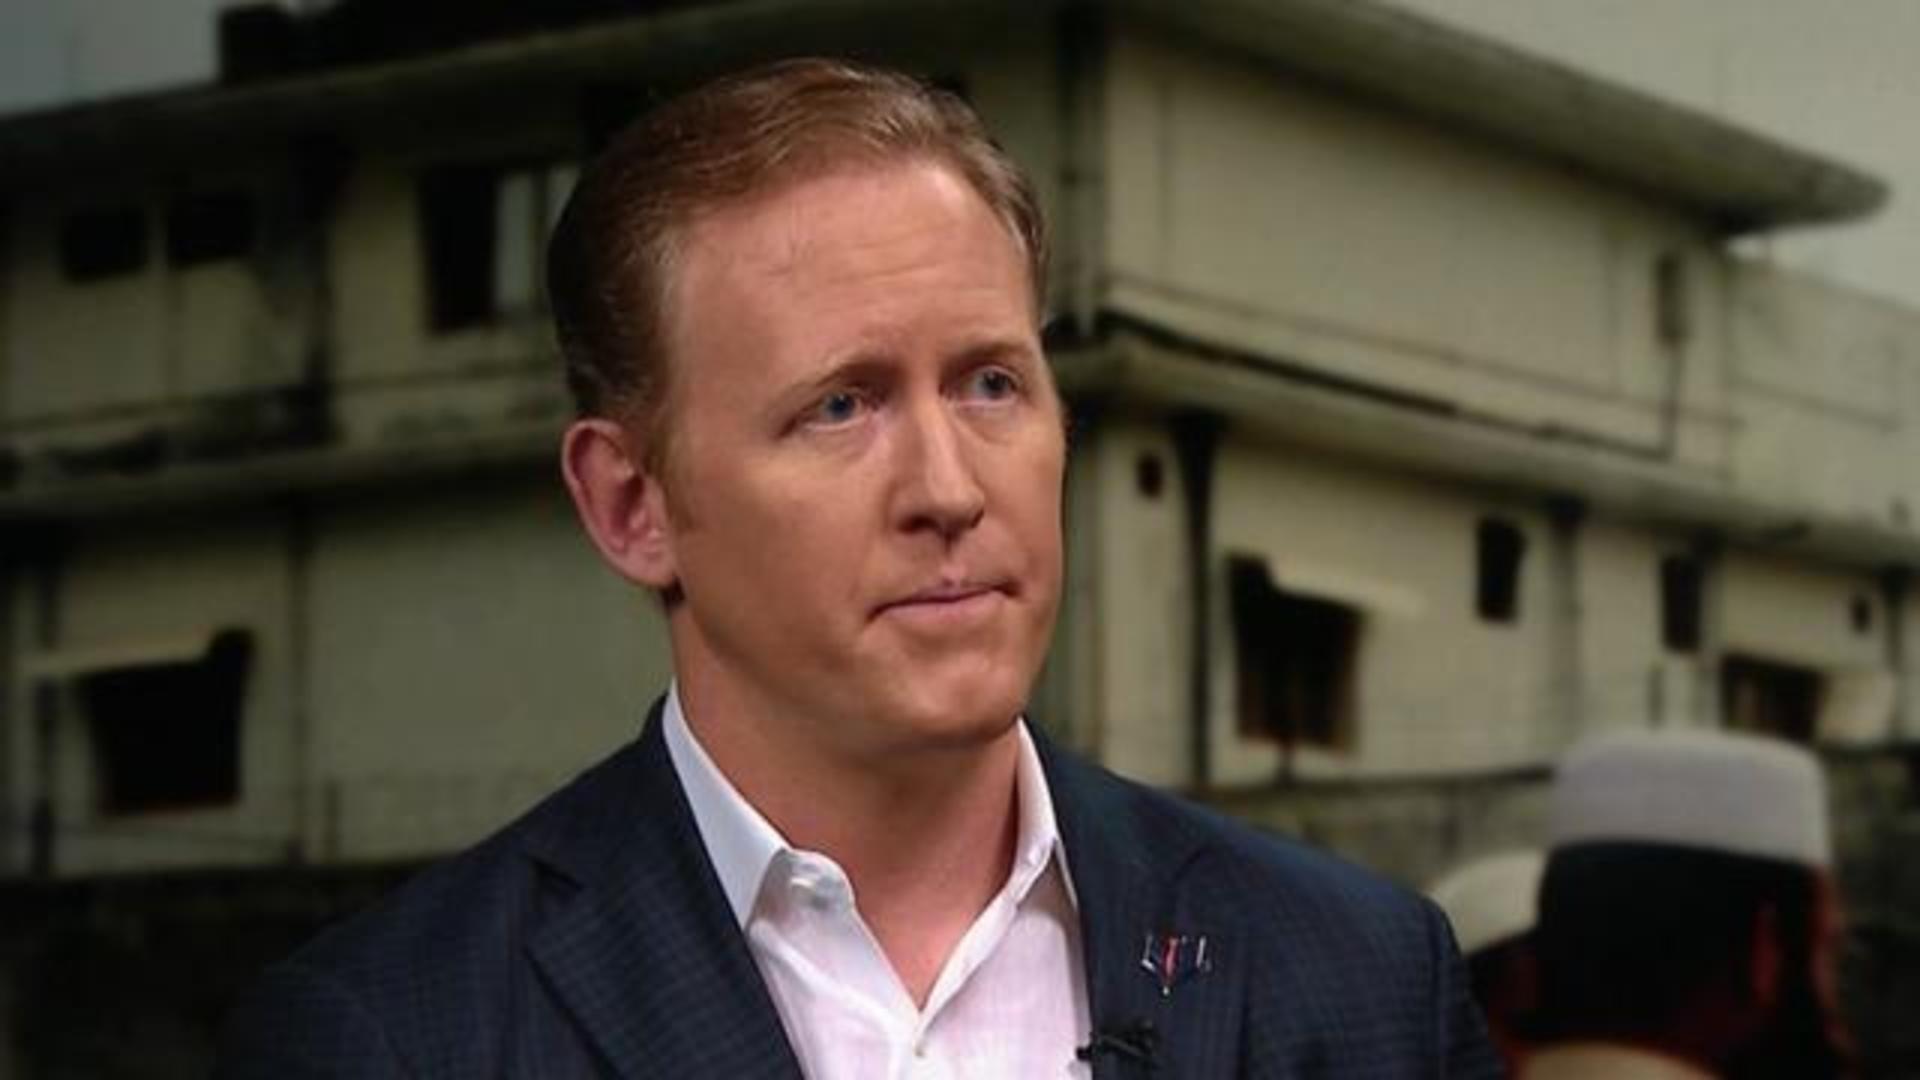 Navy SEAL who killed Bin Laden on honoring the United States